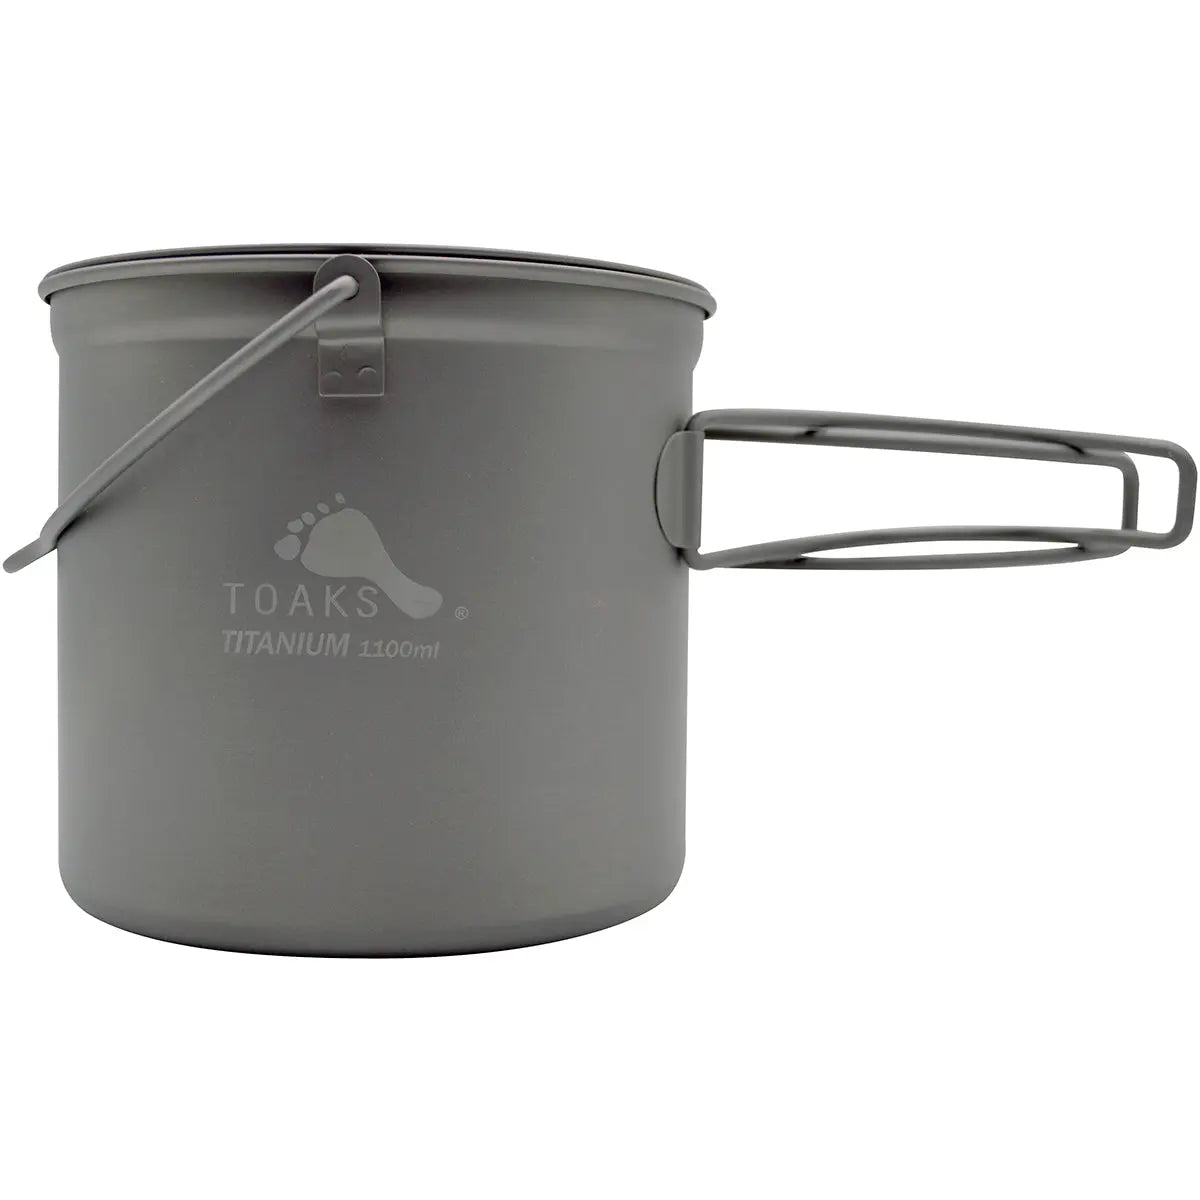 TOAKS 1100ml Titanium Camping Cooking Pot with Bail Handle and Lockable Lid TOAKS